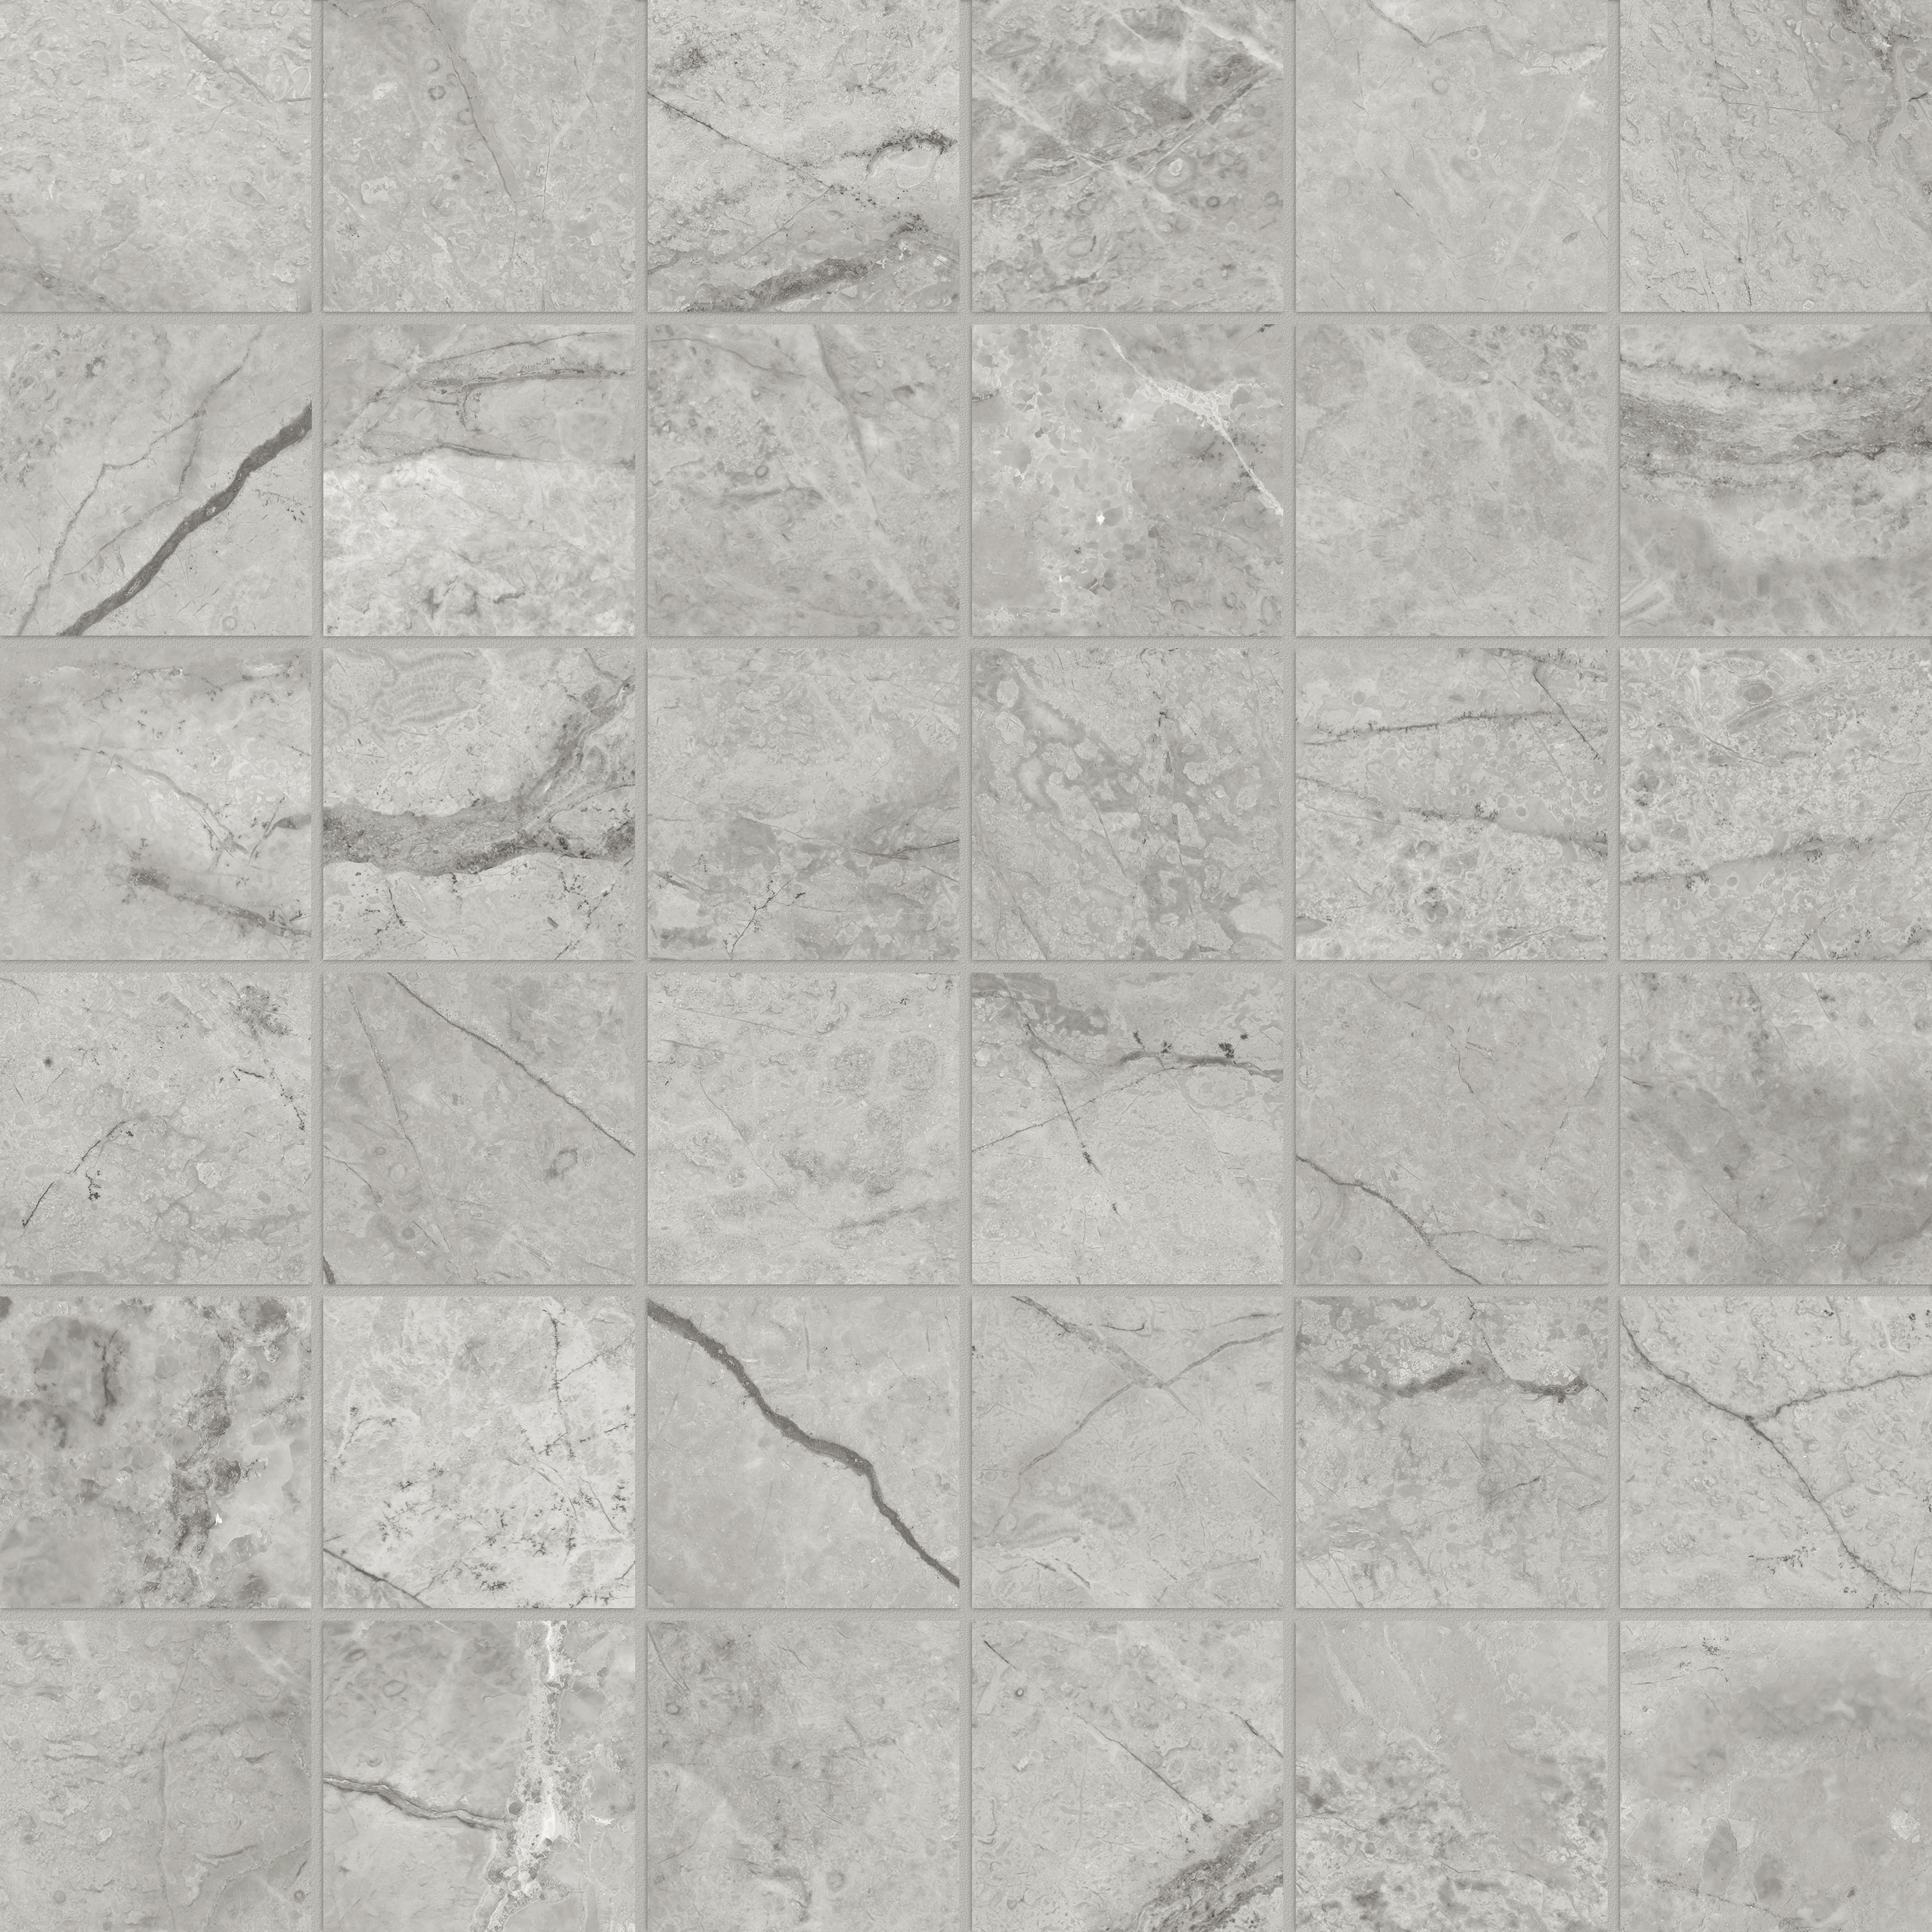 paradiso argento straight stack 2x2-inch pattern glazed porcelain mosaic from la marca anatolia collection distributed by surface group international honed finish straight edge edge mesh shape